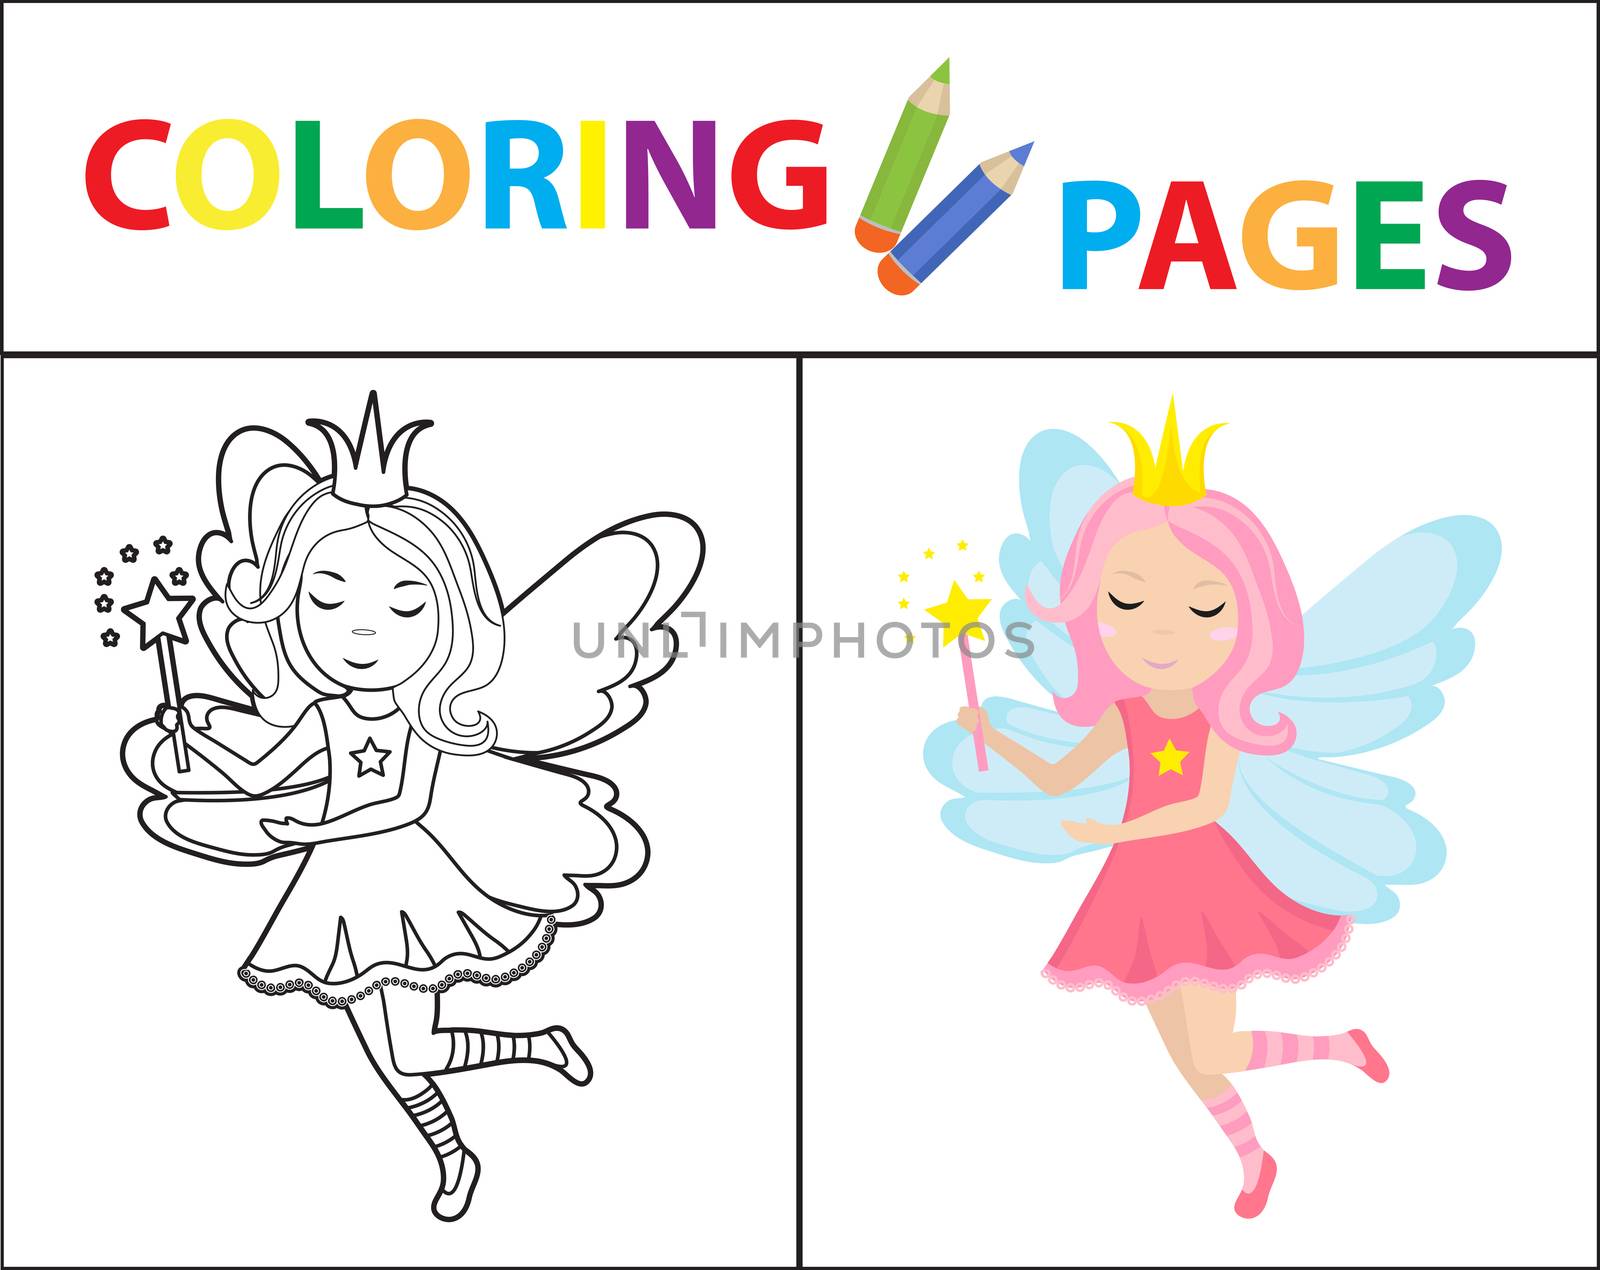 Coloring book page. Little fairy Sketch outline and color version. Coloring for kids. Childrens education. illustration